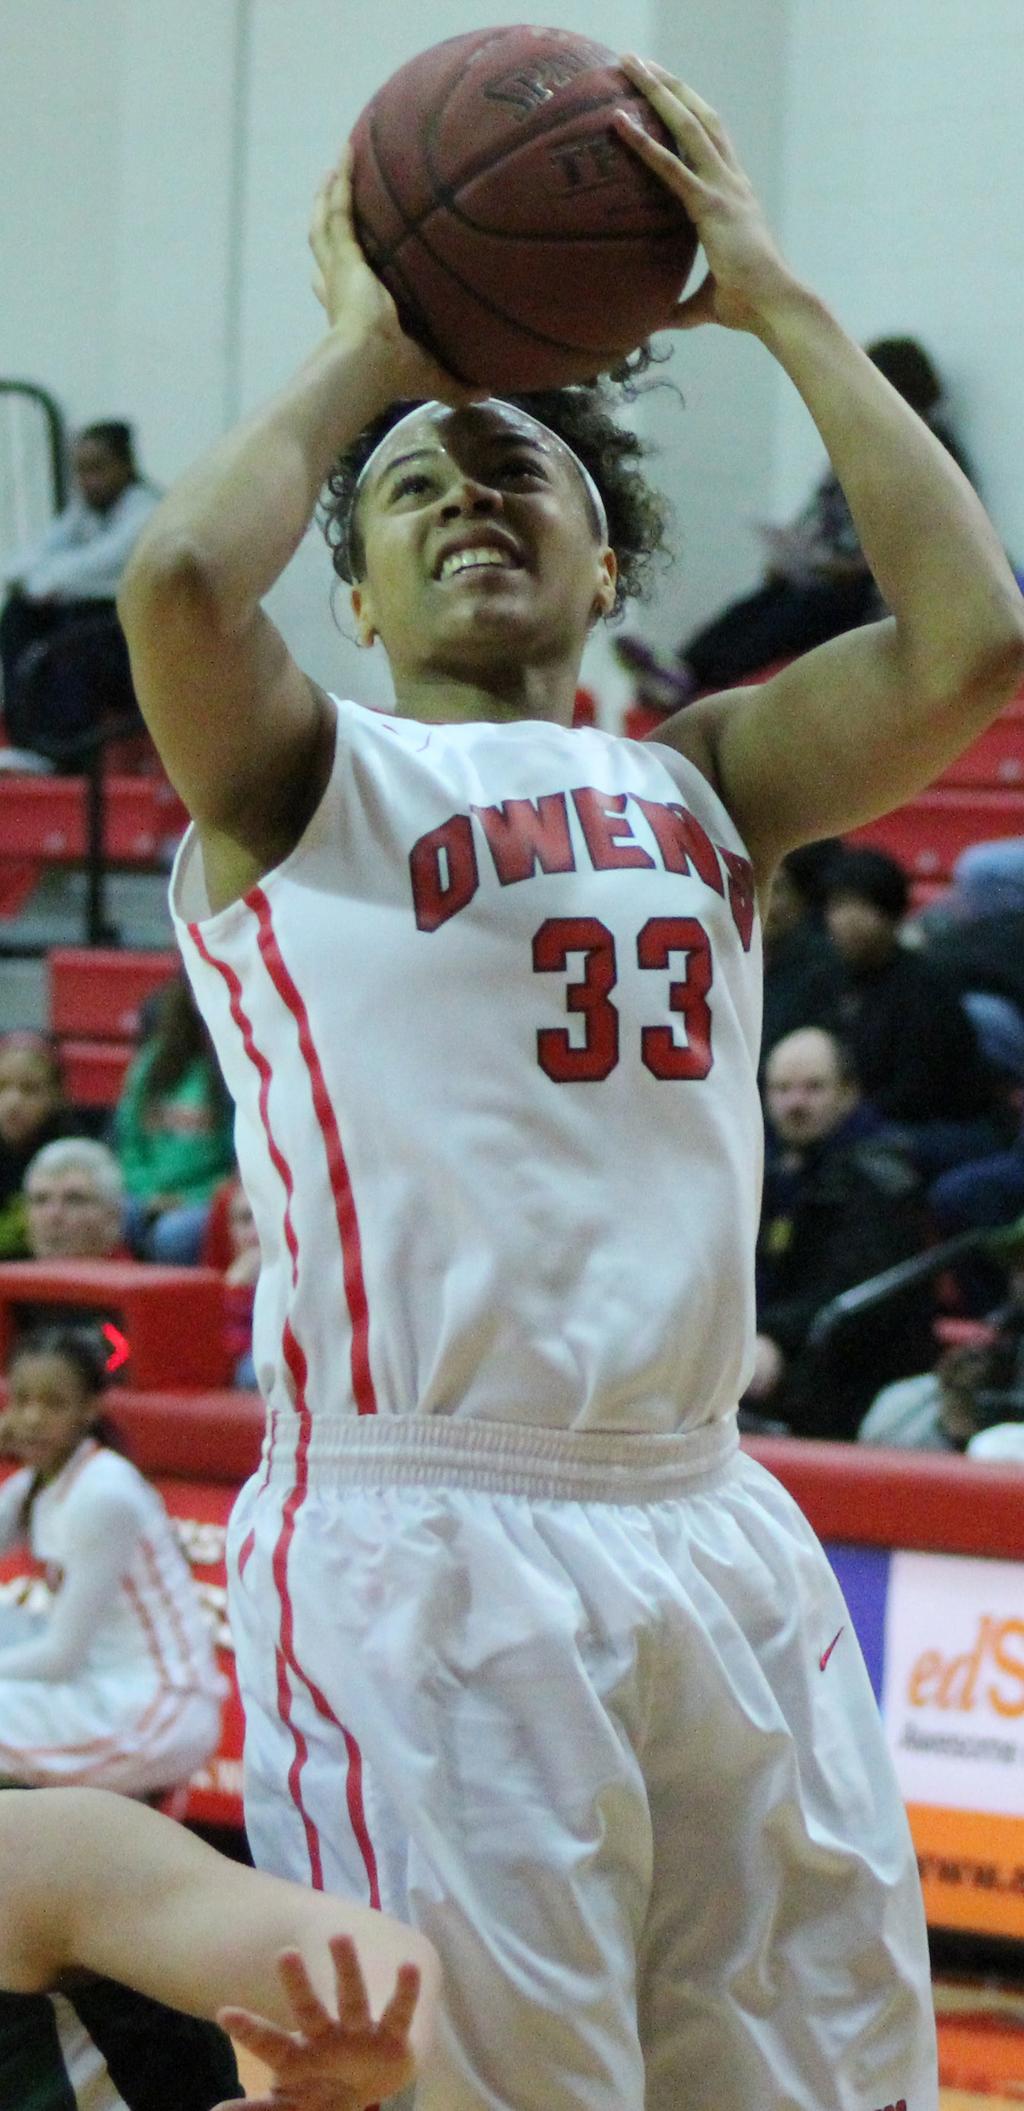 ASHLEY TUNSTALL 5-10 JR. F DAYTON, OHIO (HUBER HEIGHTS WAYNE) (OWENS CC) PRIOR TO BGSU Attended Owens CC for two years, averaging 12.9 points and 9.2 rebounds in her career.